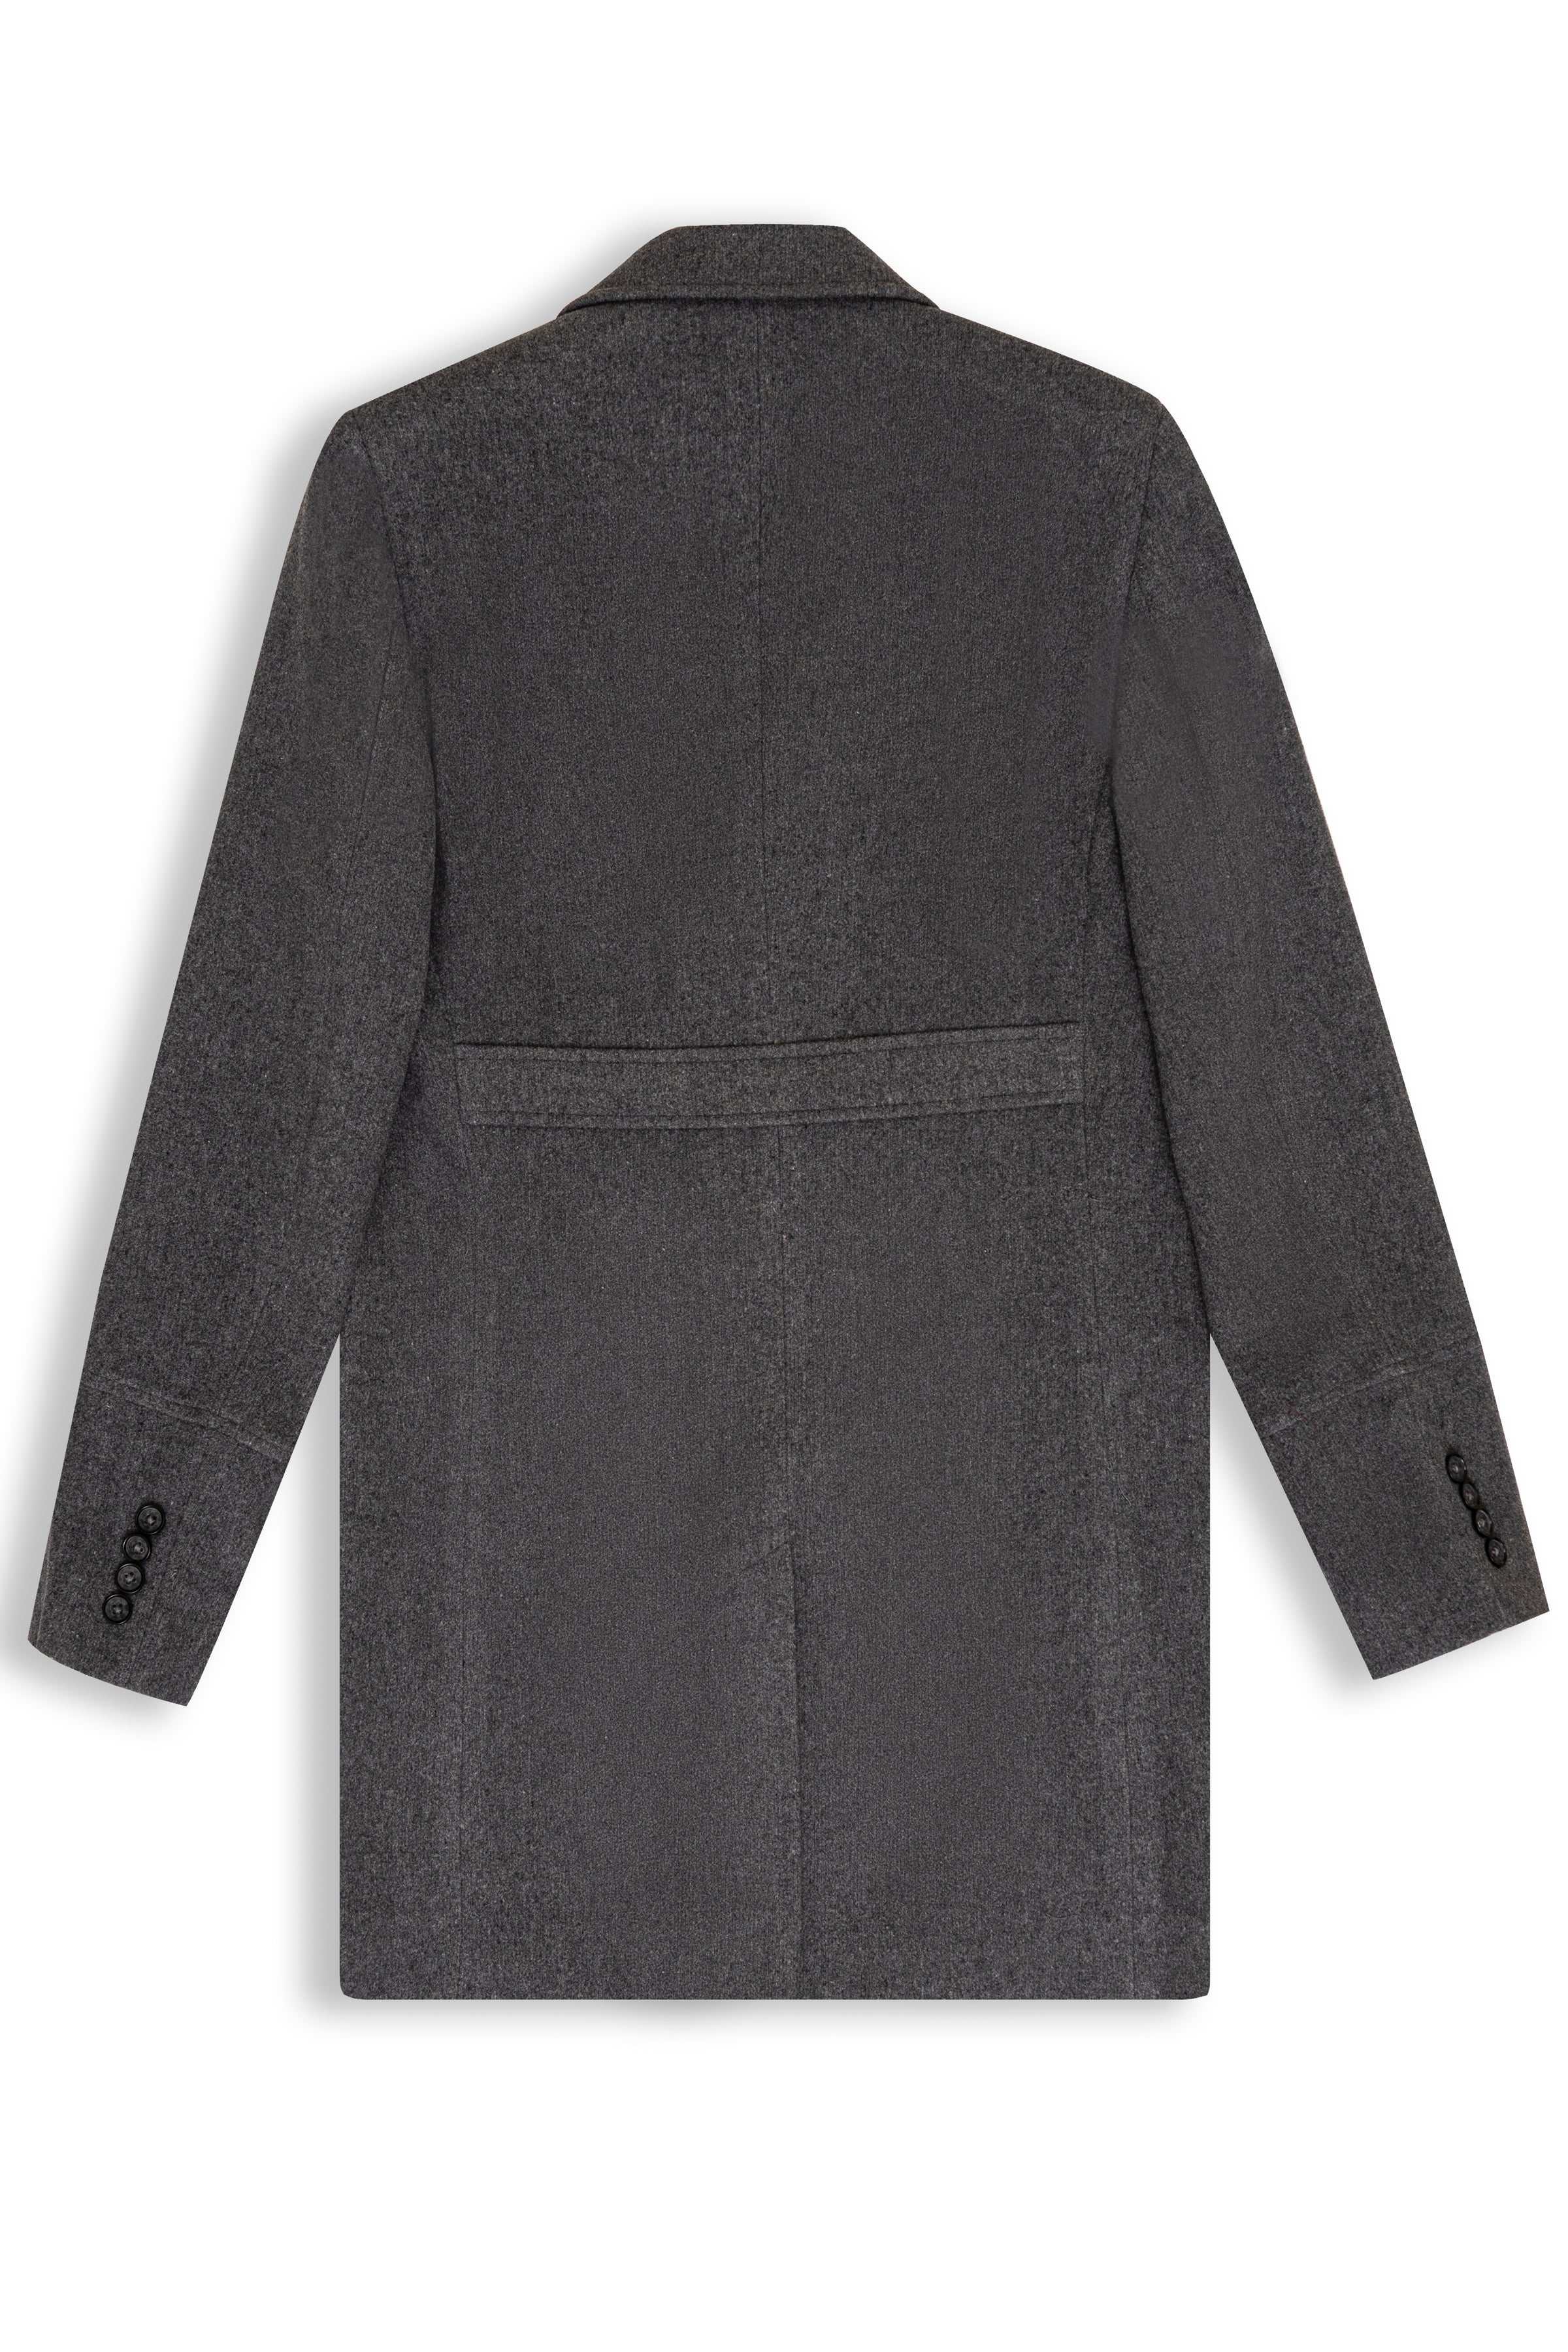 WOOLEN LONG COAT DOUBLE BREASTED GREY at Charcoal Clothing